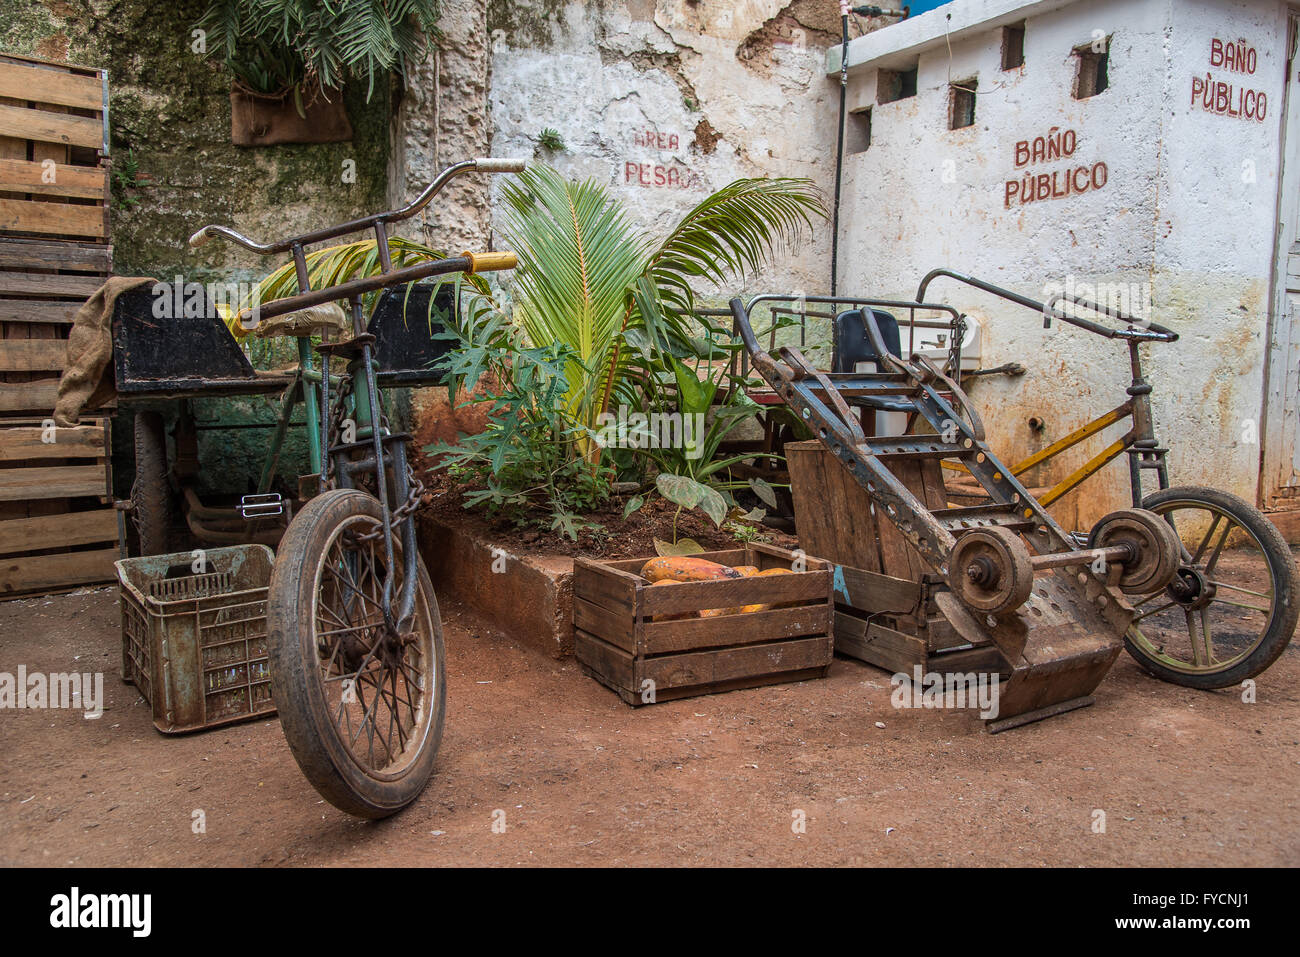 Bikes, crates and plants piled up outside a public toilet in a local market in Old Havana, Cuba. Bano Publico! Stock Photo